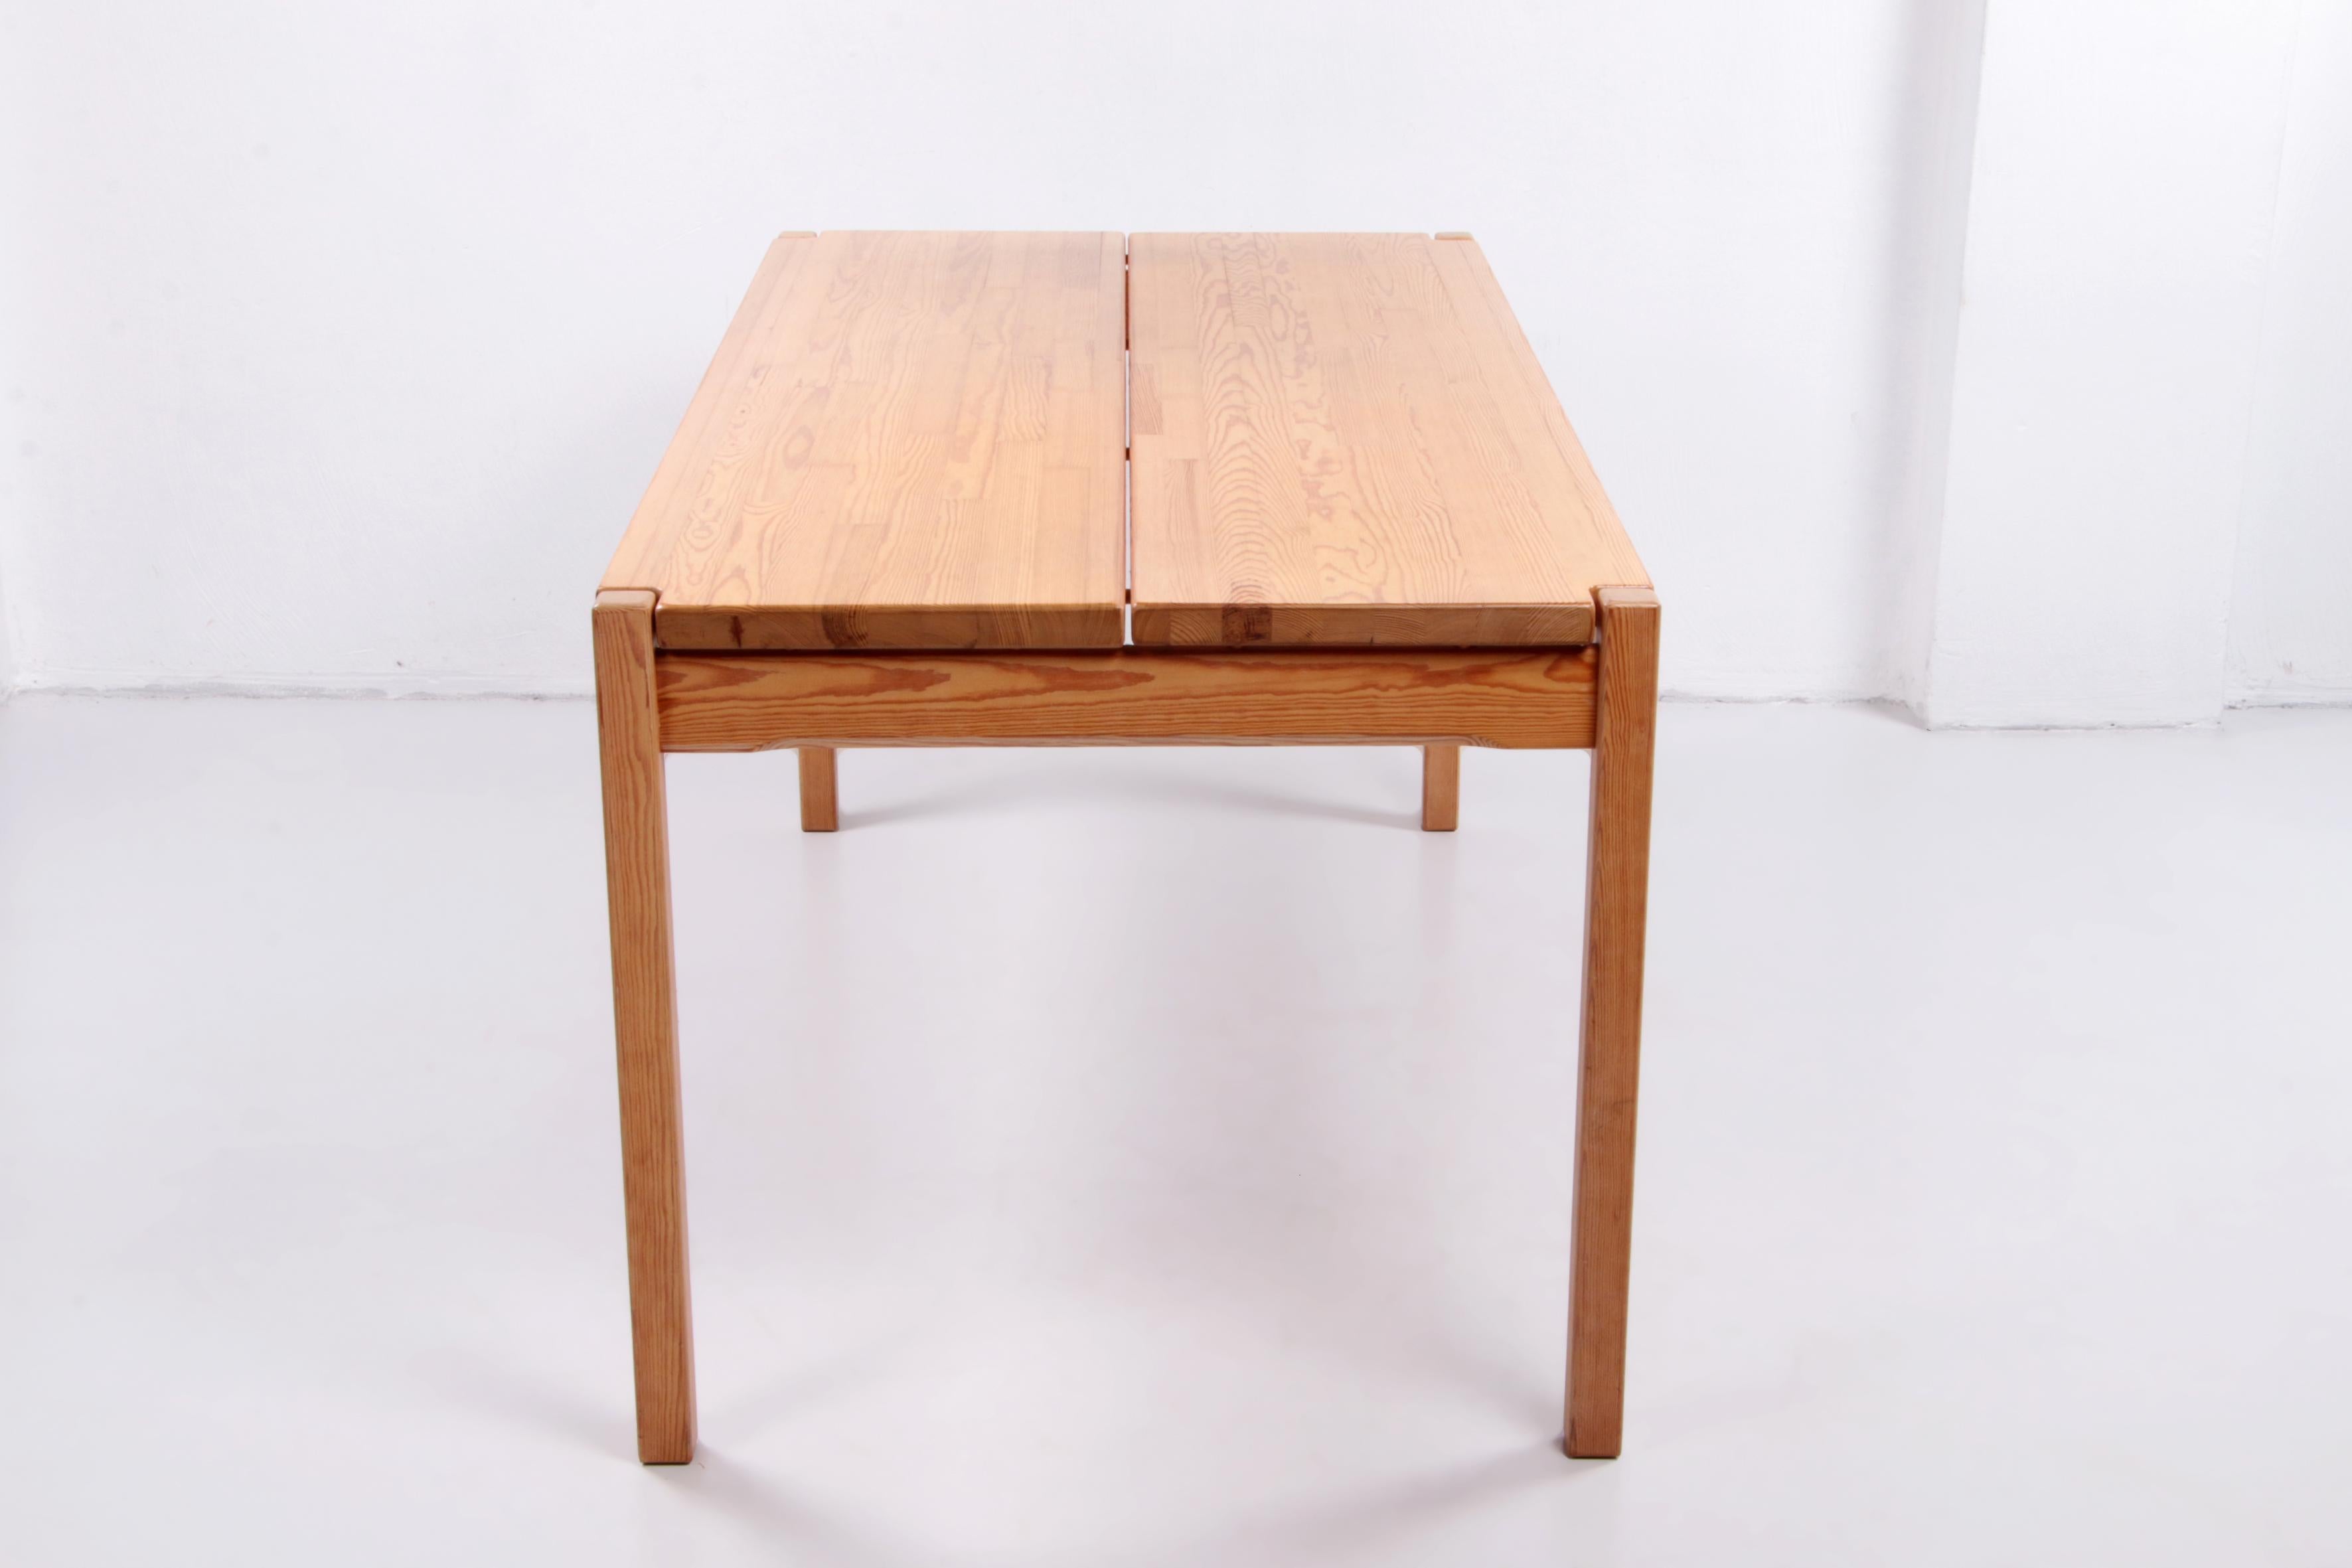 Ilmari Tapiovaara Dining Table with 4 Chairs for Laukaan Pu, 1963 For Sale 2